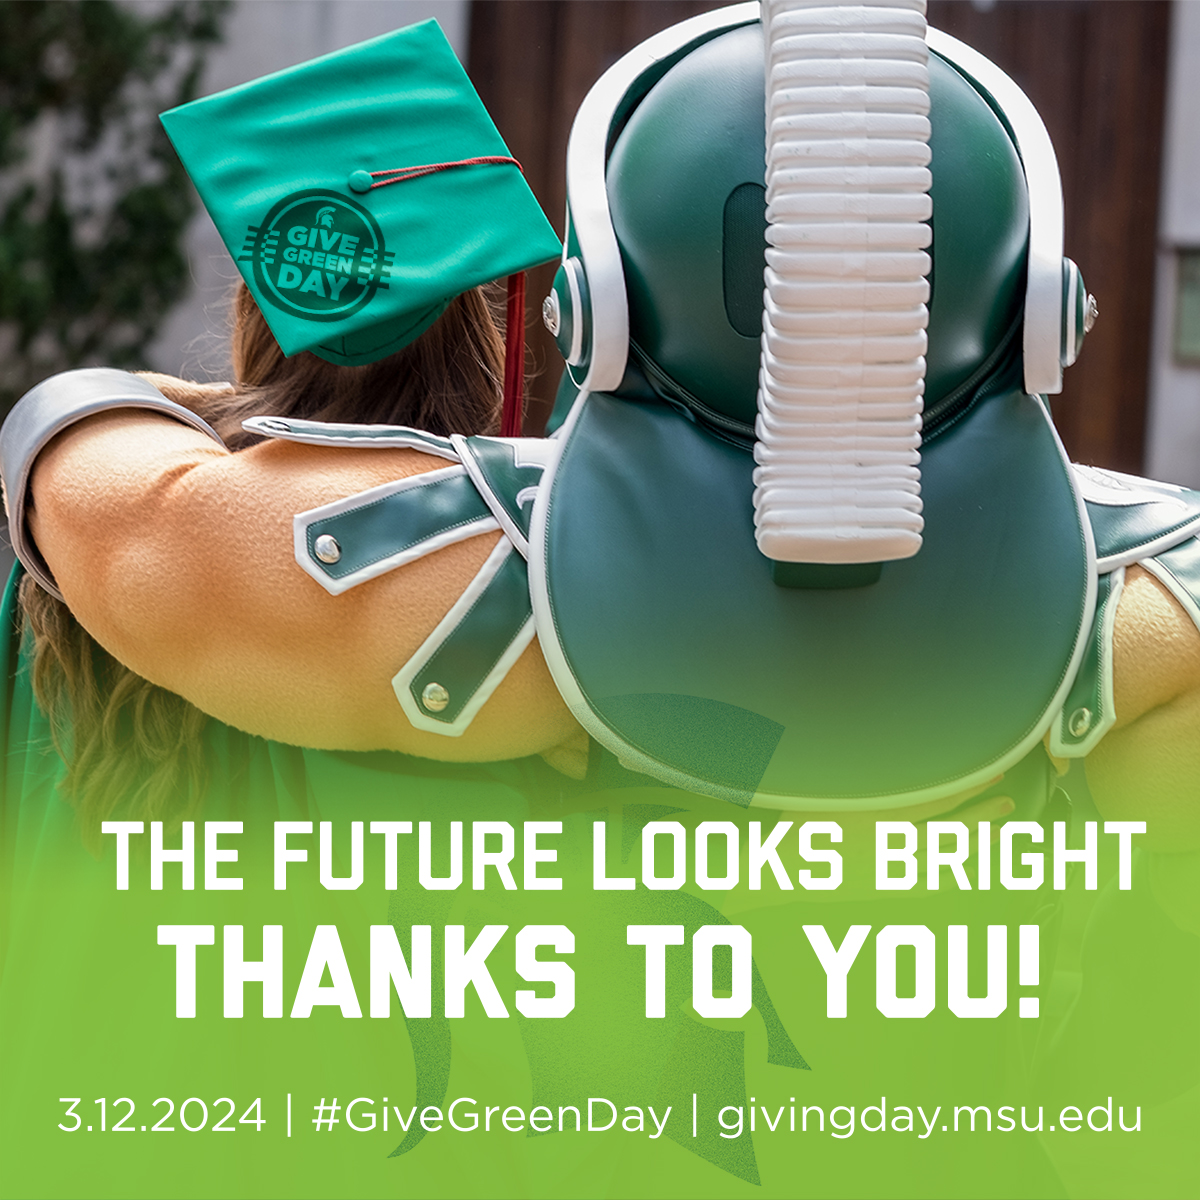 Thank you to all who participated in this year's #GiveGreenDay campaign. Together we raised over $15,000 for Campbell Hall and successfully doubled our goal. Whether you viewed our campaign, shared it with a friend, or donated in support, we appreciate you.